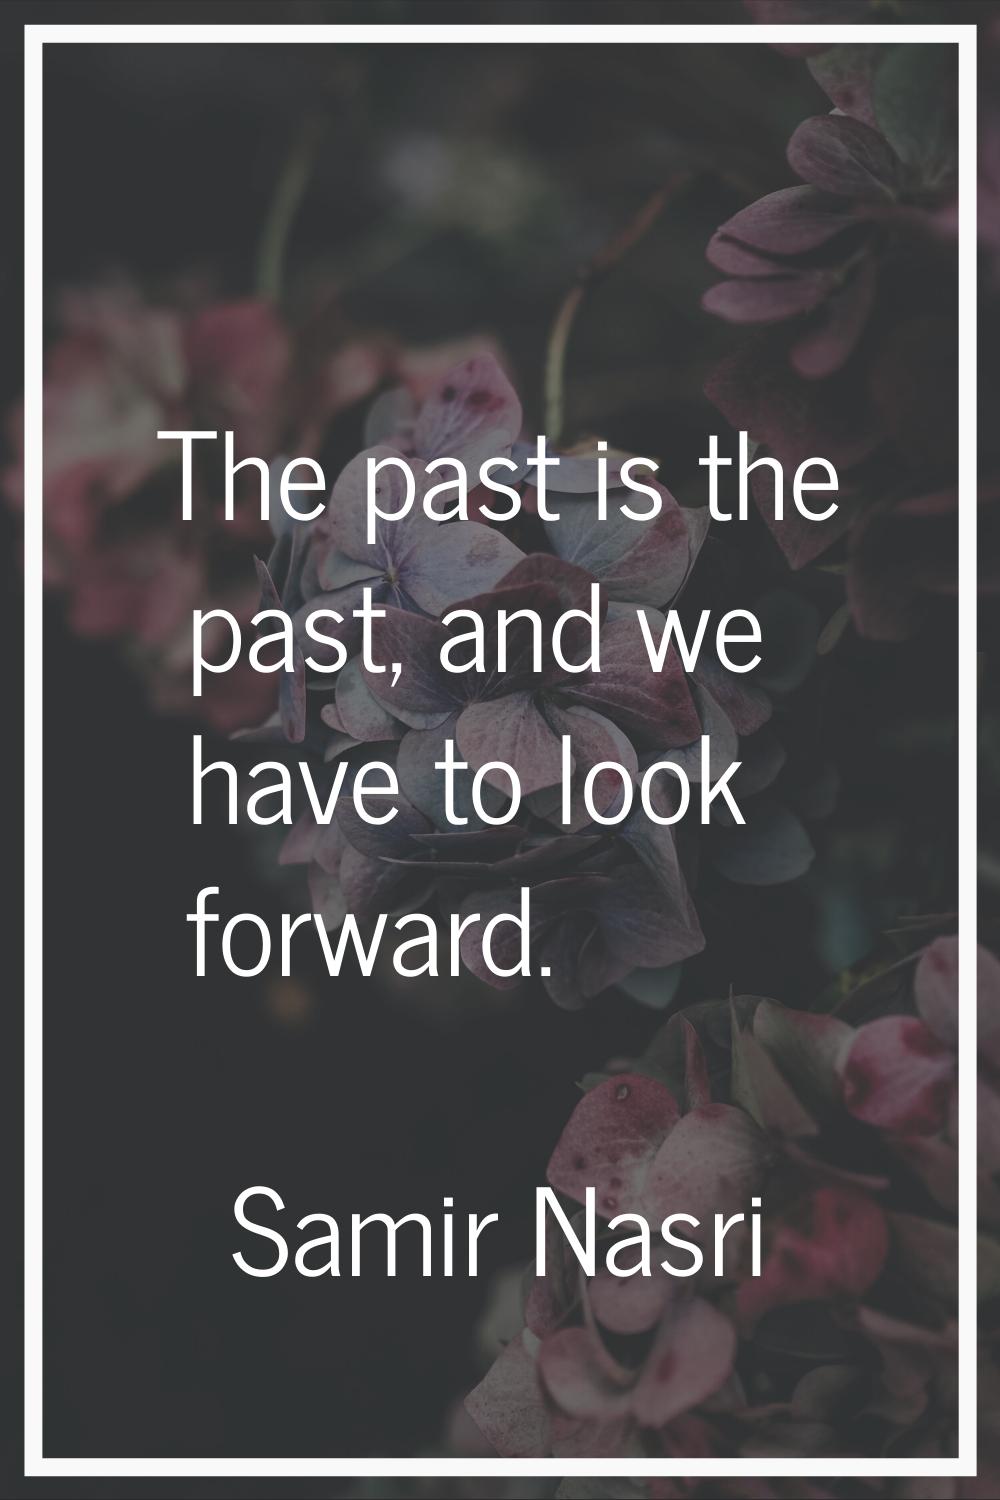 The past is the past, and we have to look forward.